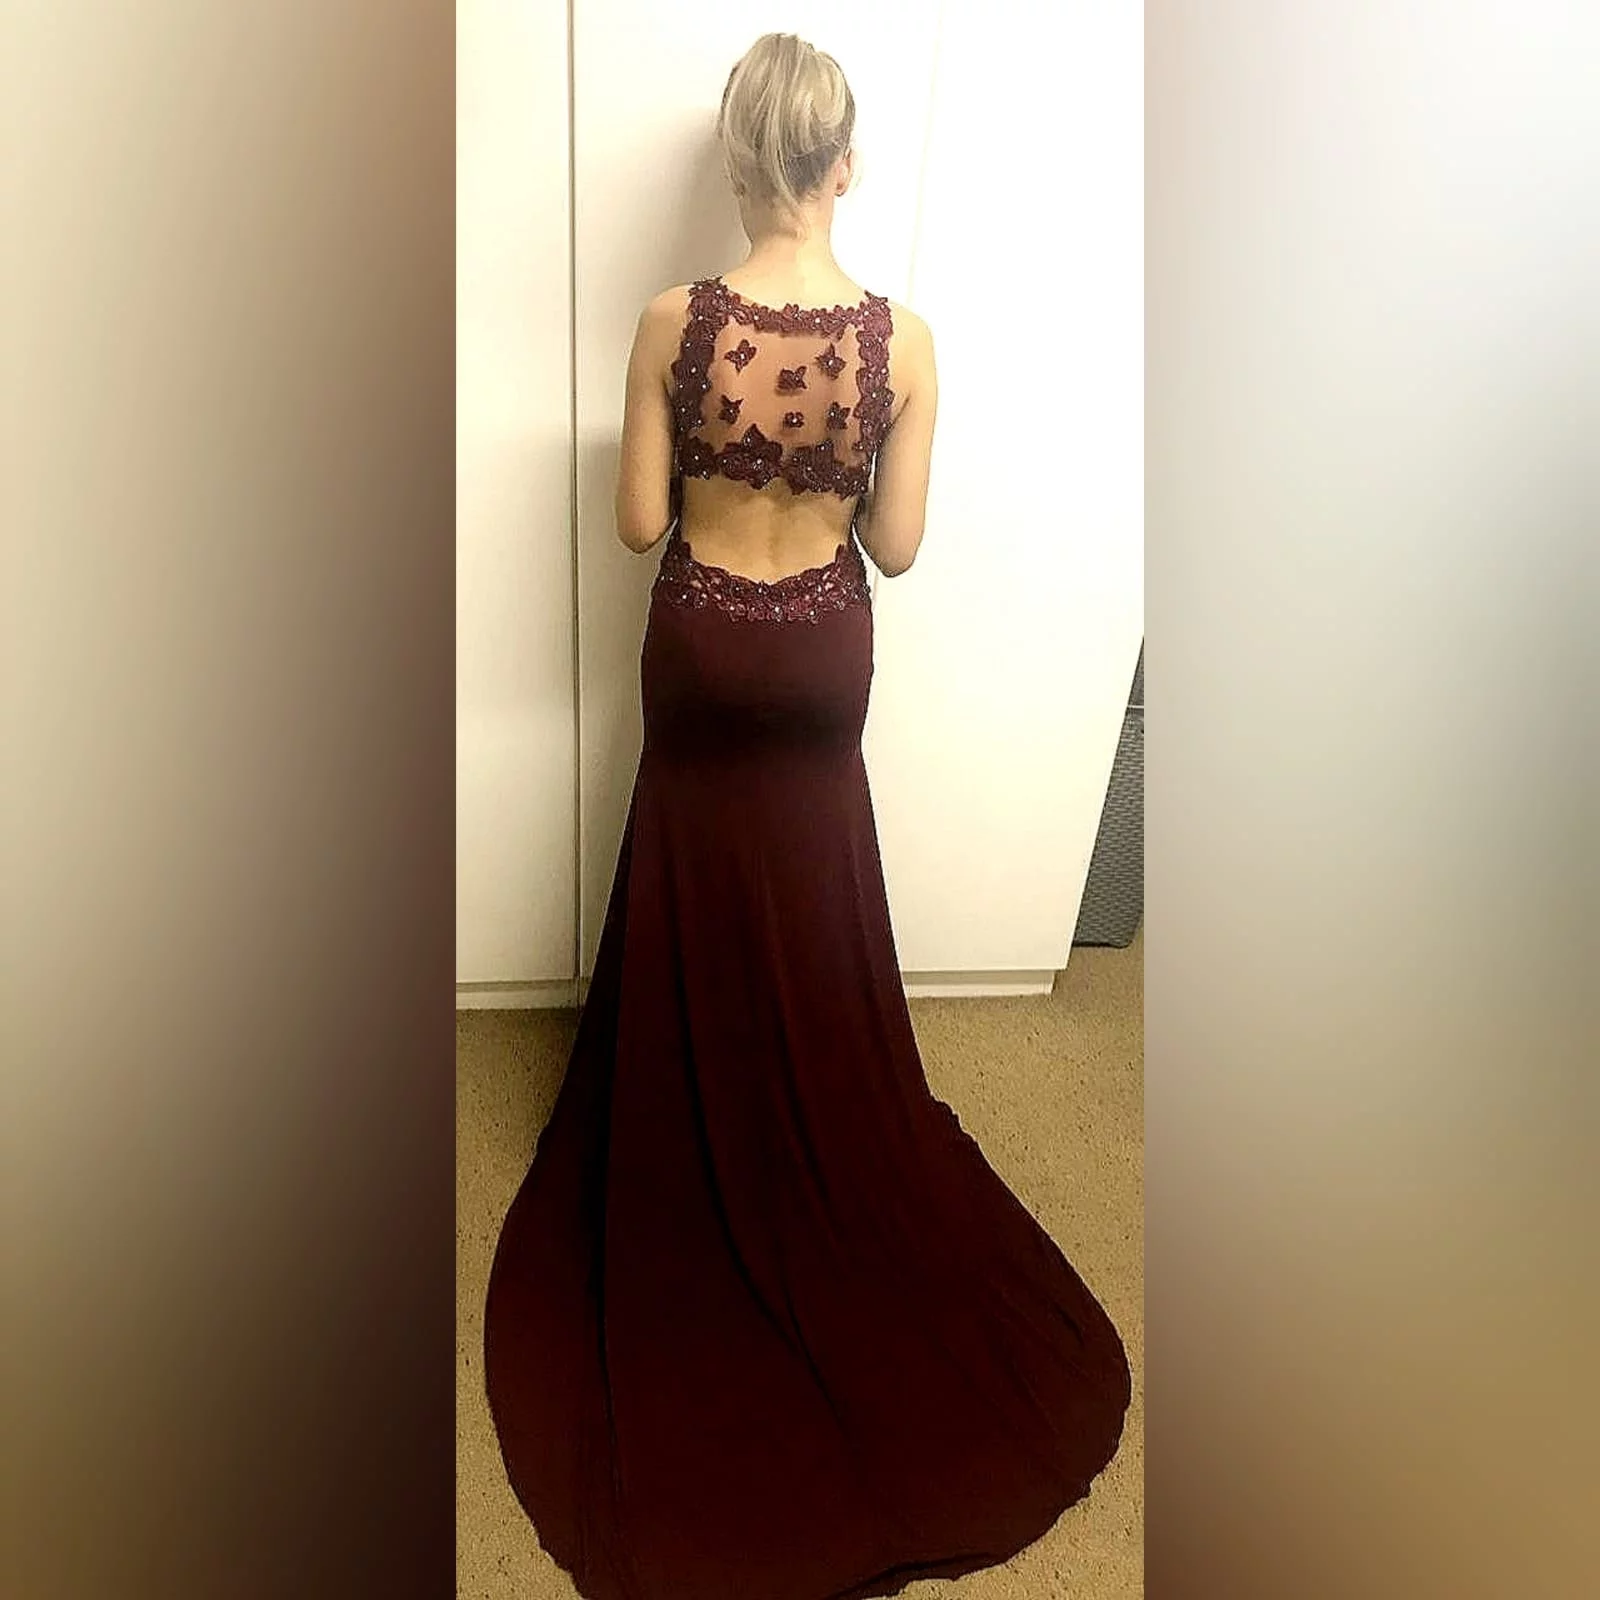 Burgundy long sexy prom dress 11 burgundy long sexy prom dress with an illusion lace low back and side tummy. Sweetheart neckline detailed with lace. With a slit and a train.